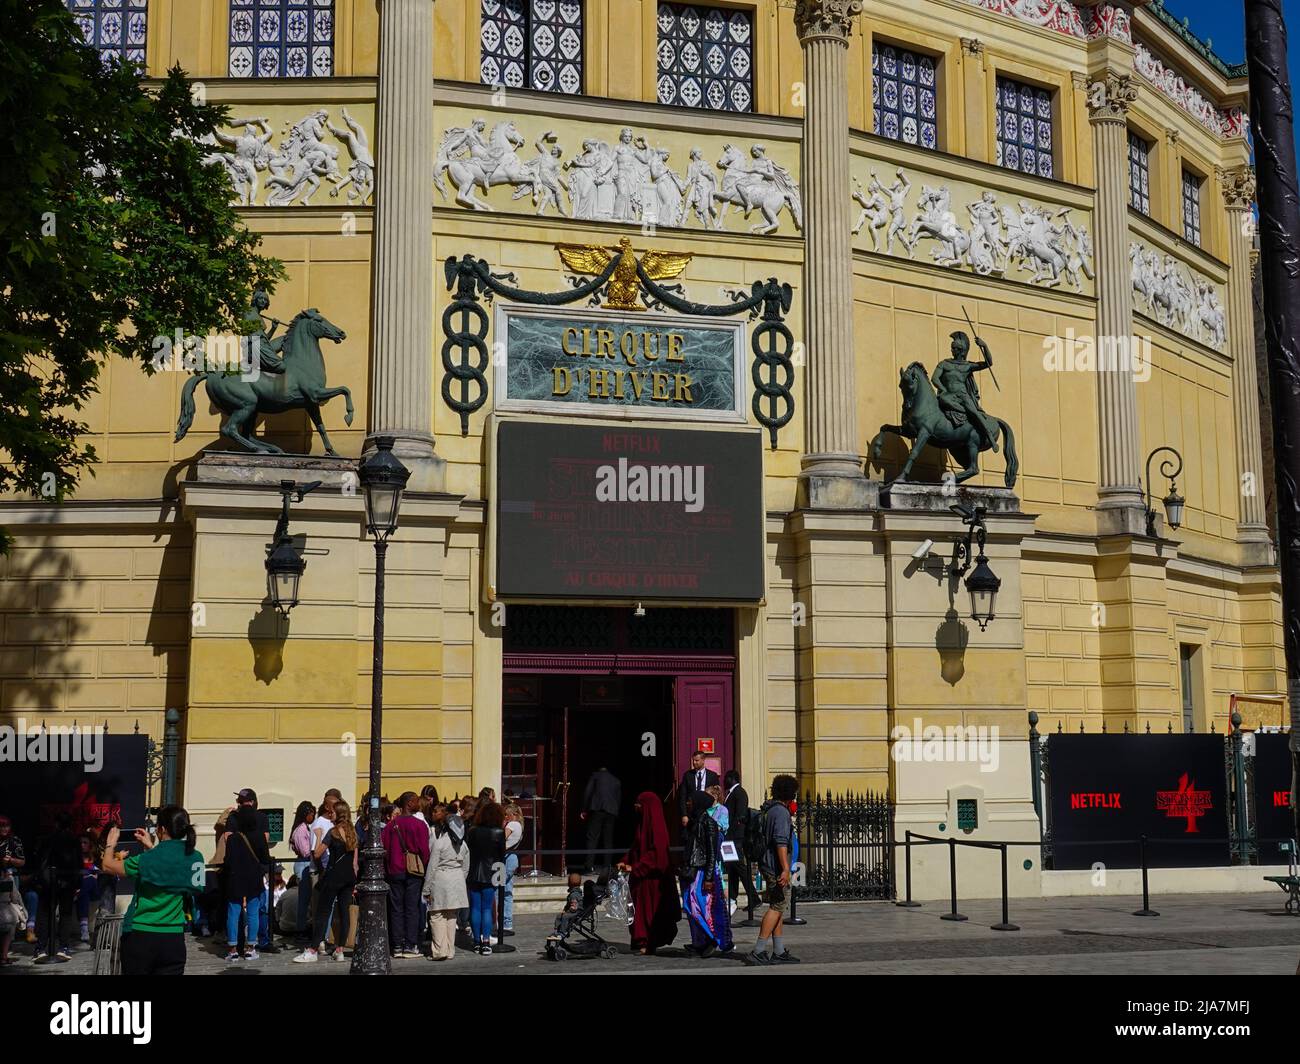 Paris, FR. 28th May, 2022. People line up for admission to the NETFLIX: Stranger Things Festival held at Cirque d’Hiver Bouglione, Rue Amelot, 11th Arrondissement. While launching the 4th season of Stranger Things, Netflix invited the public to explore the upside down world at Cirque d’Hiver Bouglione with the Stranger Things Festival, May 26 to 29, 2022. Stock Photo